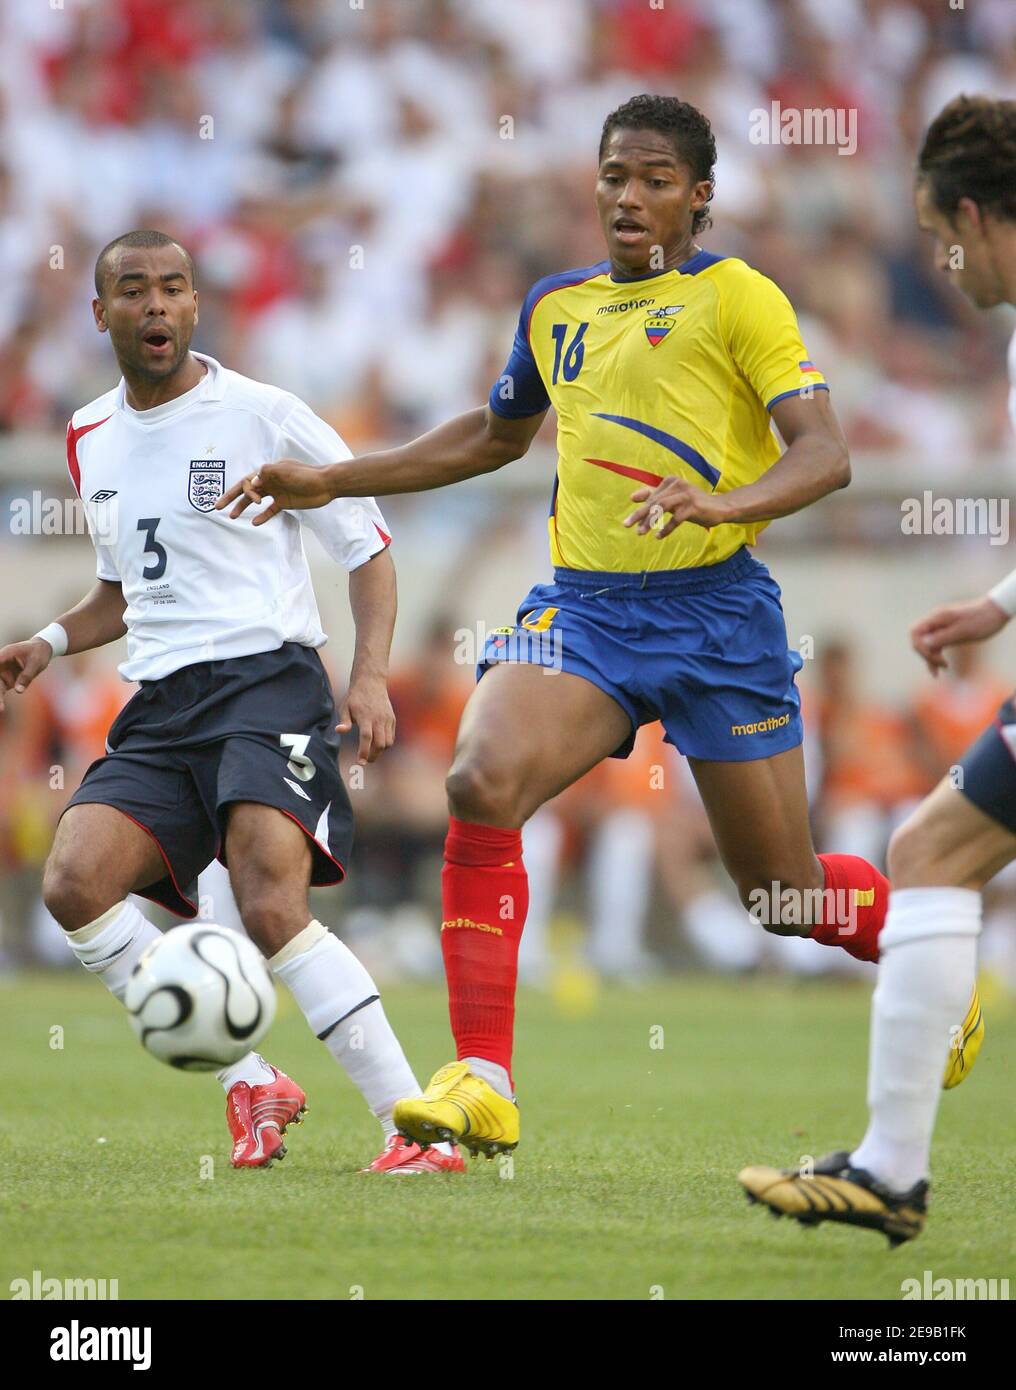 Ecuador's Luis Valencia in action during the World Cup 2006, Second round, England vs Ecuador at the Gottlieb-Daimler-Stadion stadium in Stuttgart, Germany on June 25, 2006. England won 1-0. Photo by Gouhier-Hahn-Orban/Cameleon/ABACAPRESS.COM Stock Photo